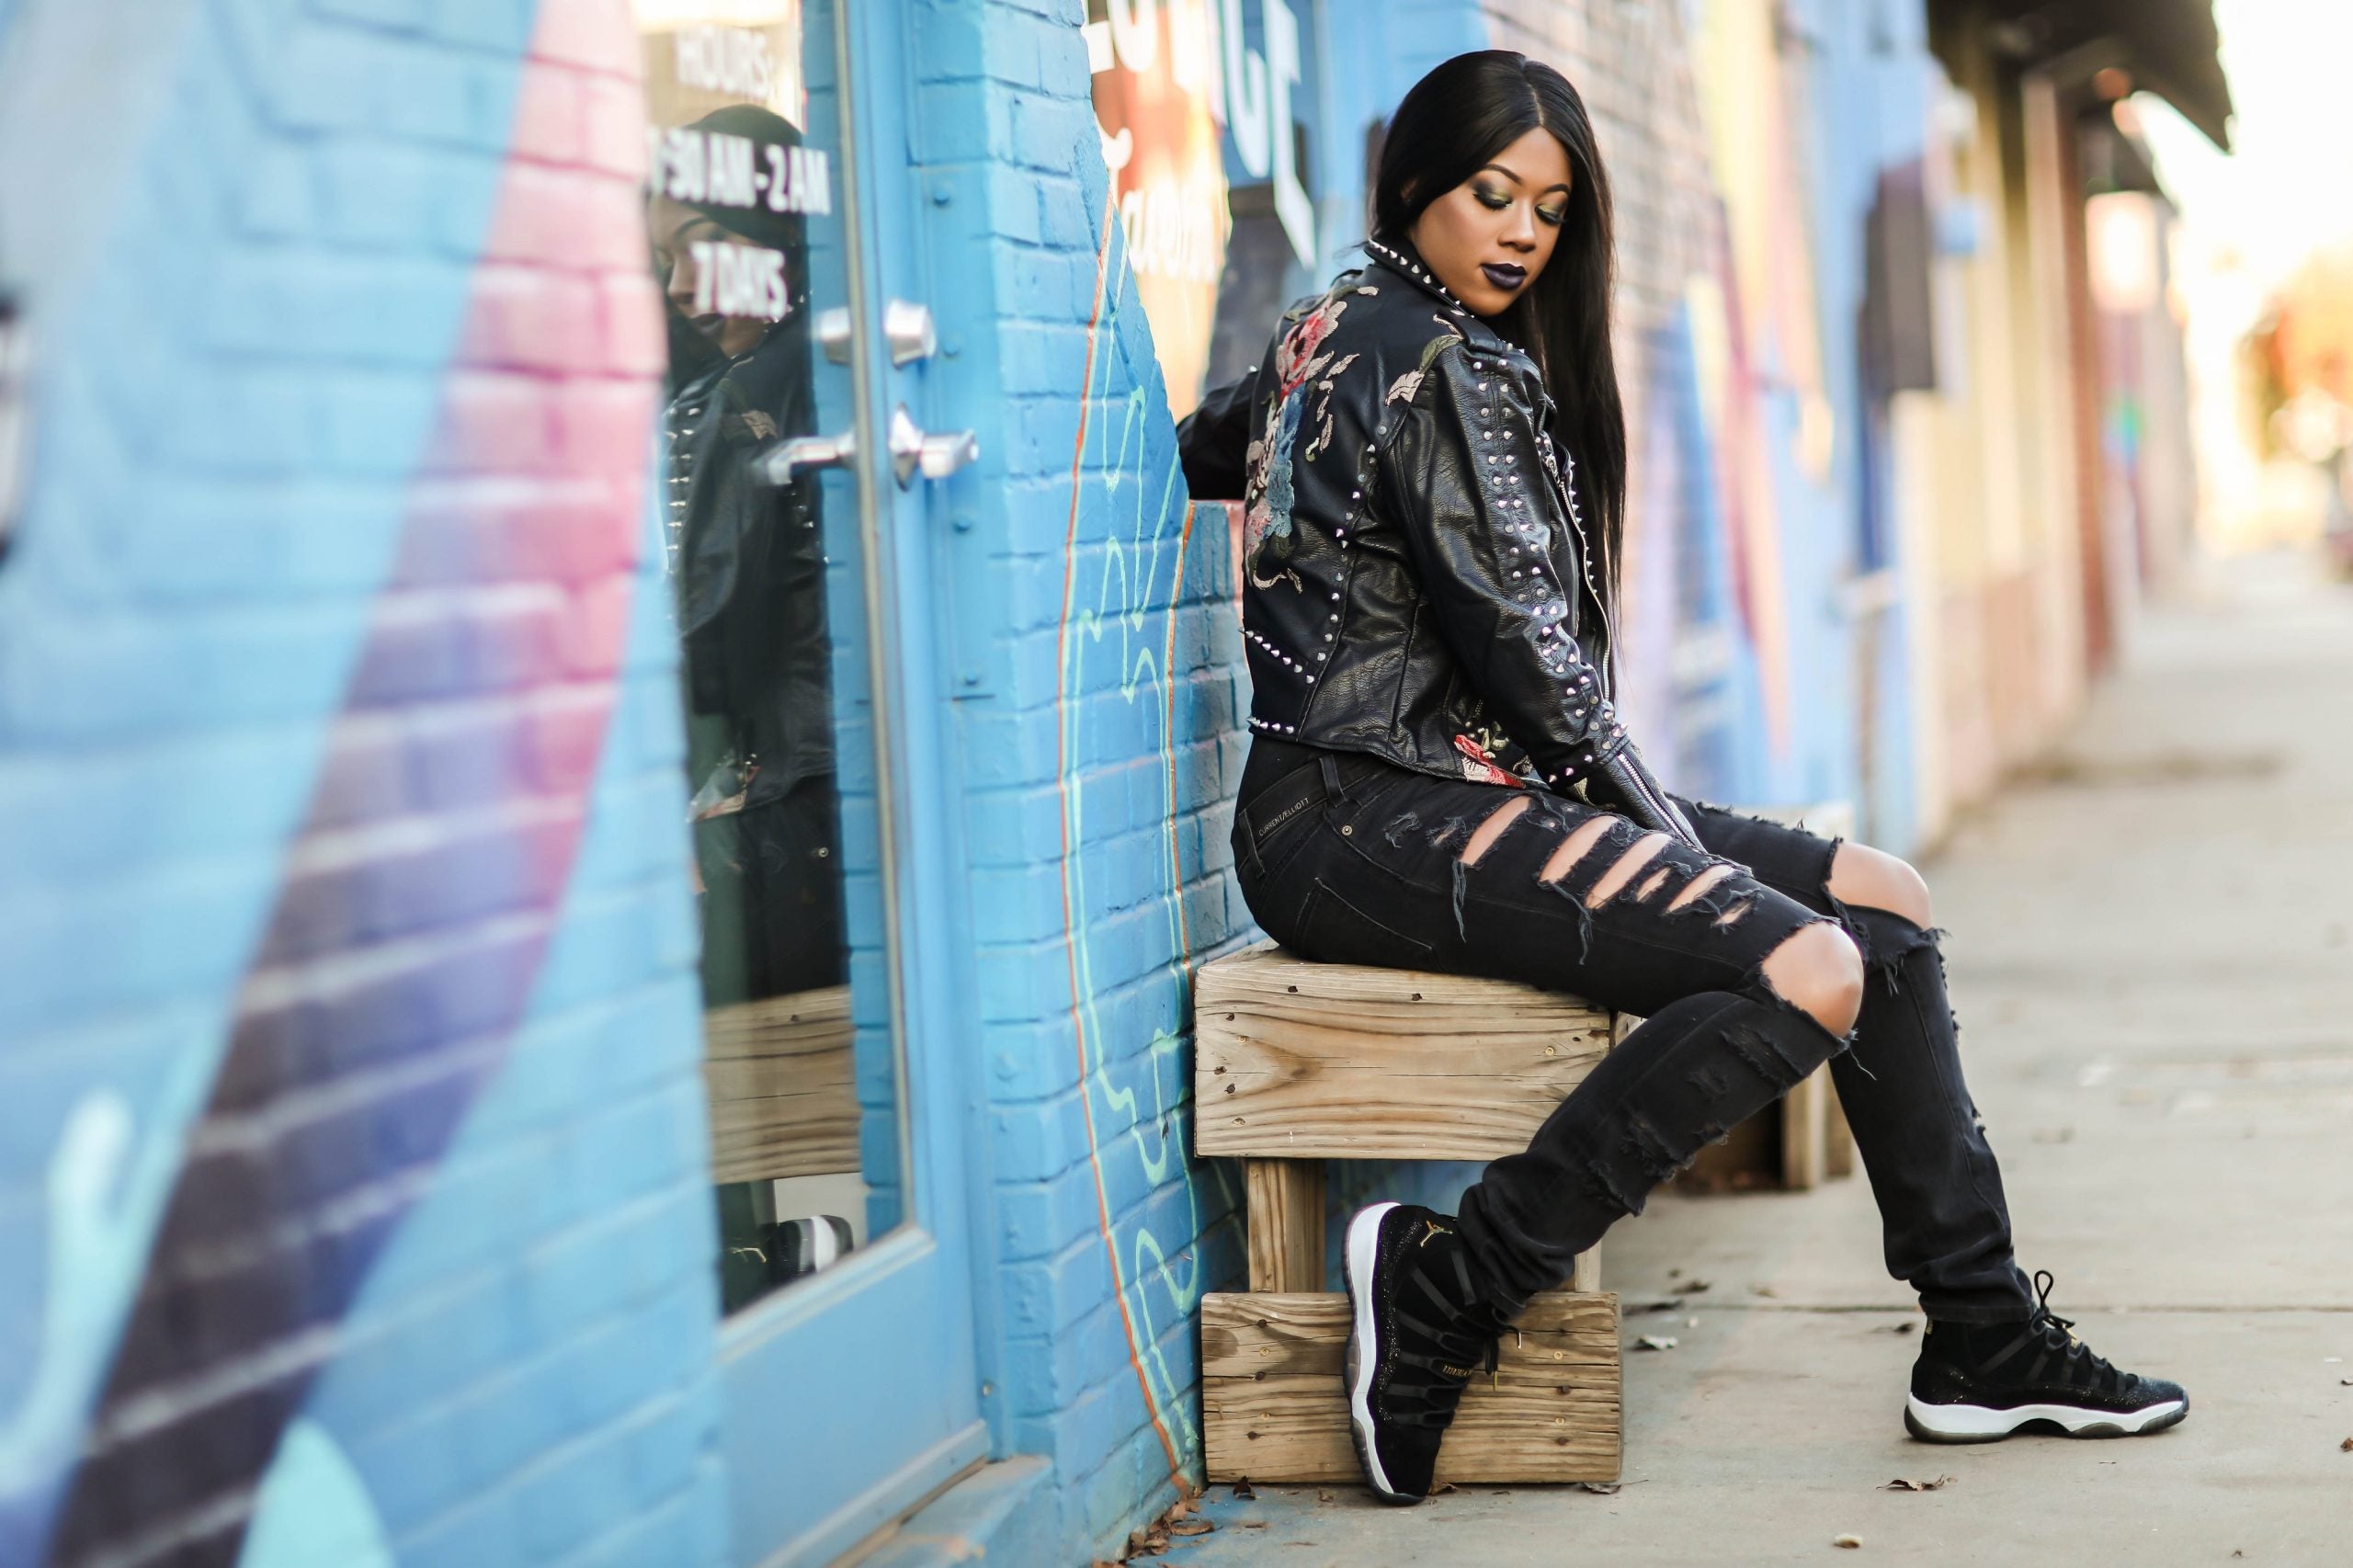 ‘Sole Searching’: Jasmine Jordan Aims To ‘Keep These Younger Generations Connected’ To The Jordan Brand